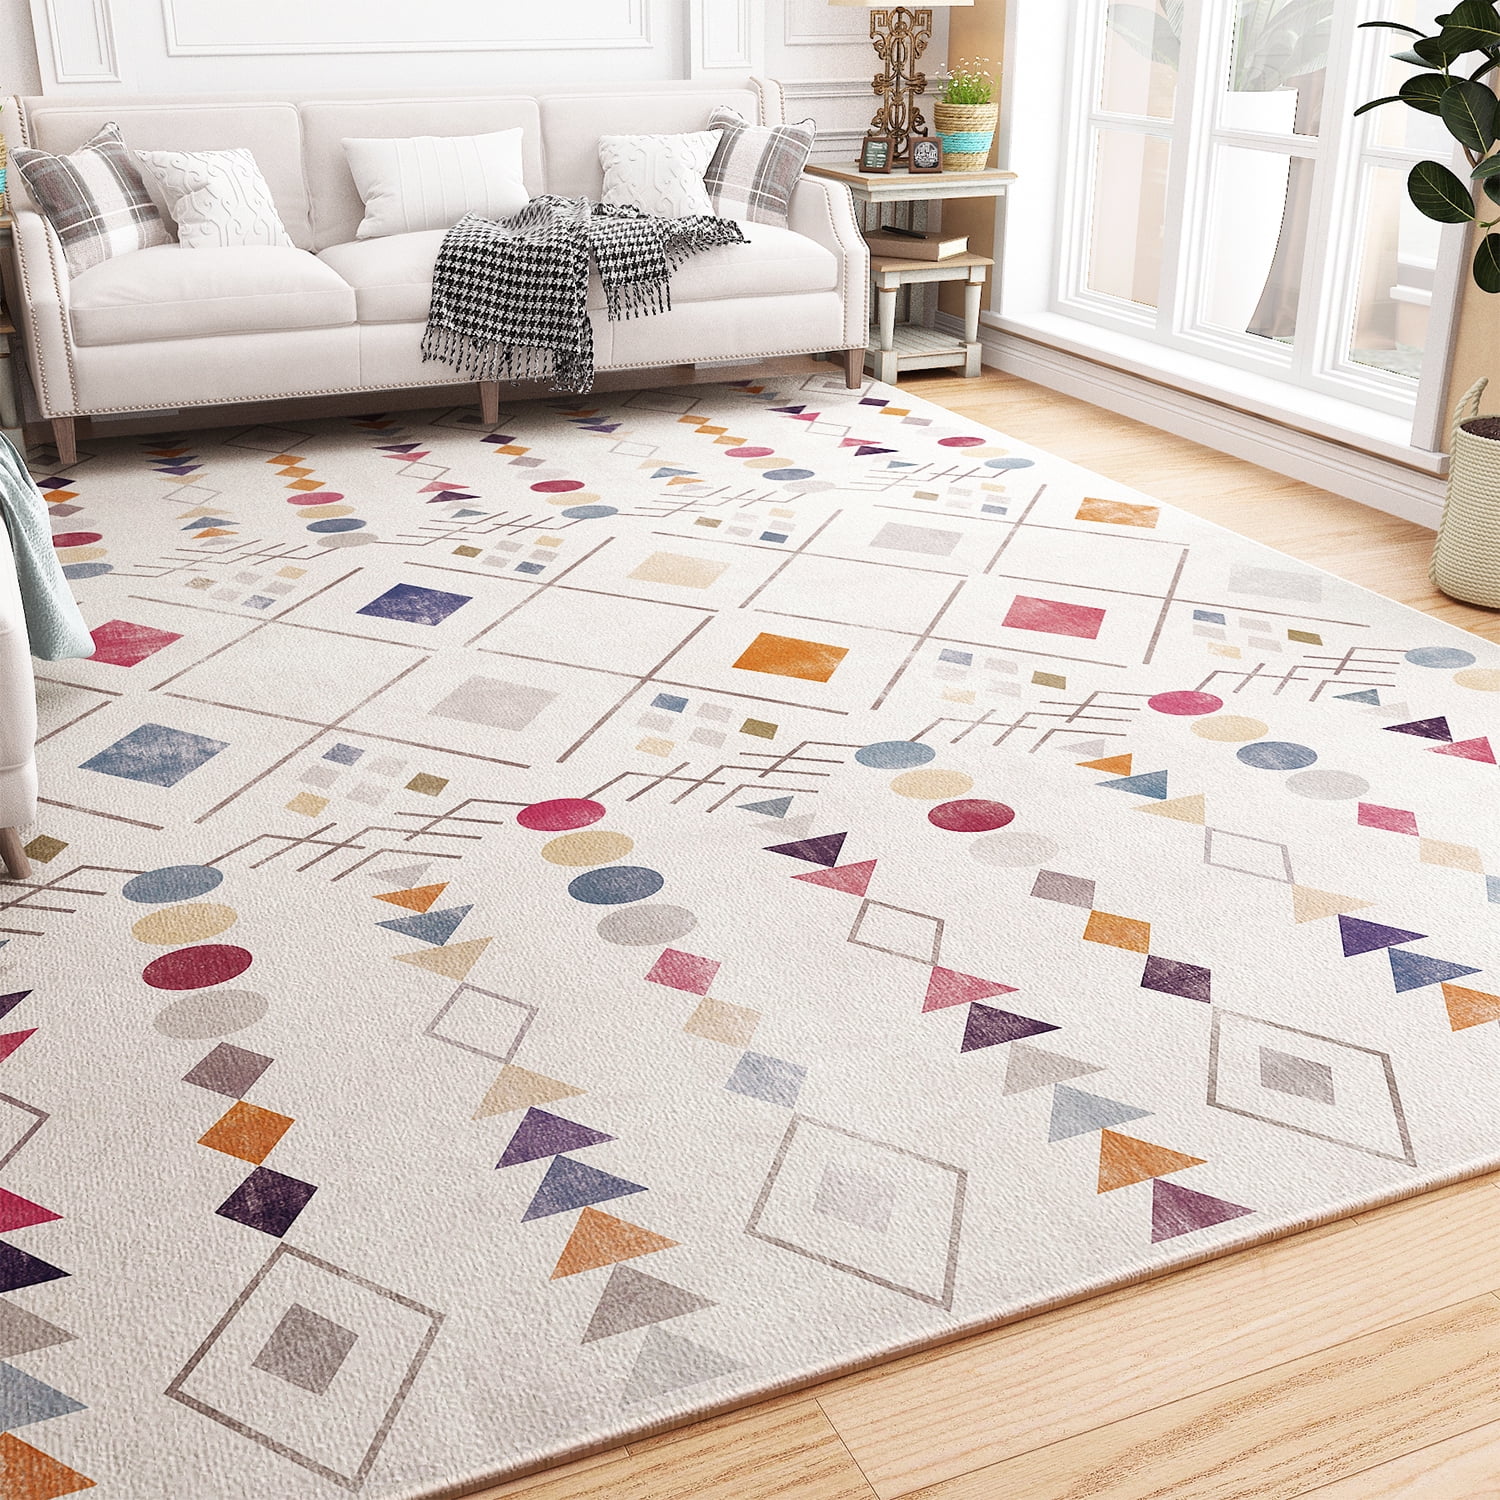 SIXHOME Rugs for Living Room 8x10 Boho Area Rugs Large Washable Non Slip  Carpets Modern Indoor Floor Rugs for Bedroom Classroom Nursery Beige and